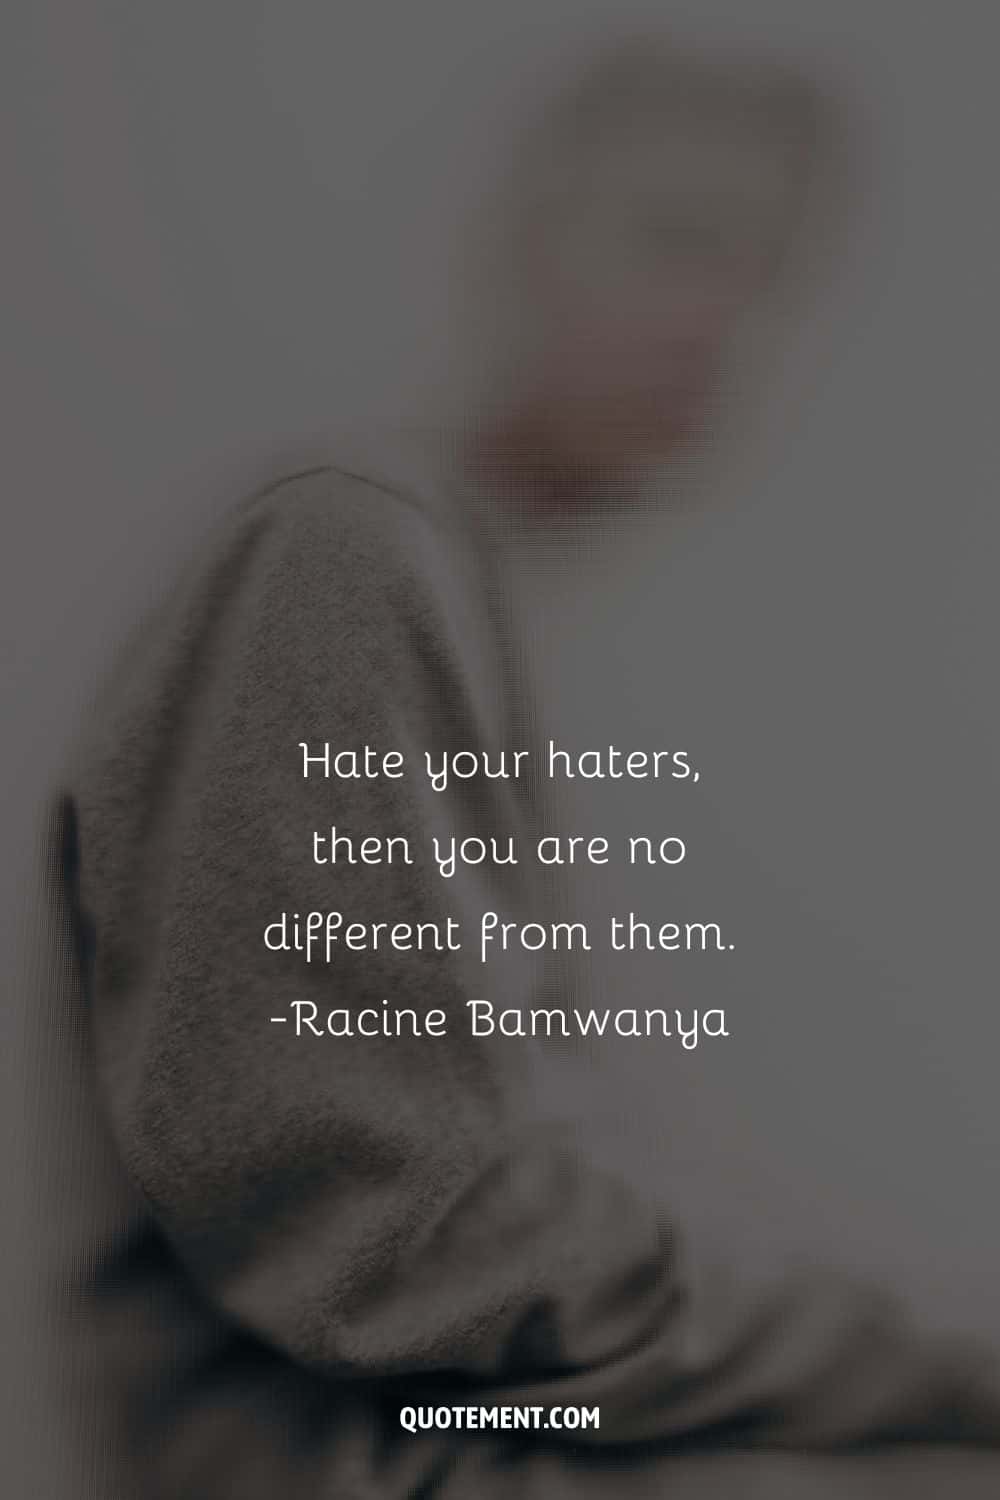 Hate your haters, then you are no different from them.